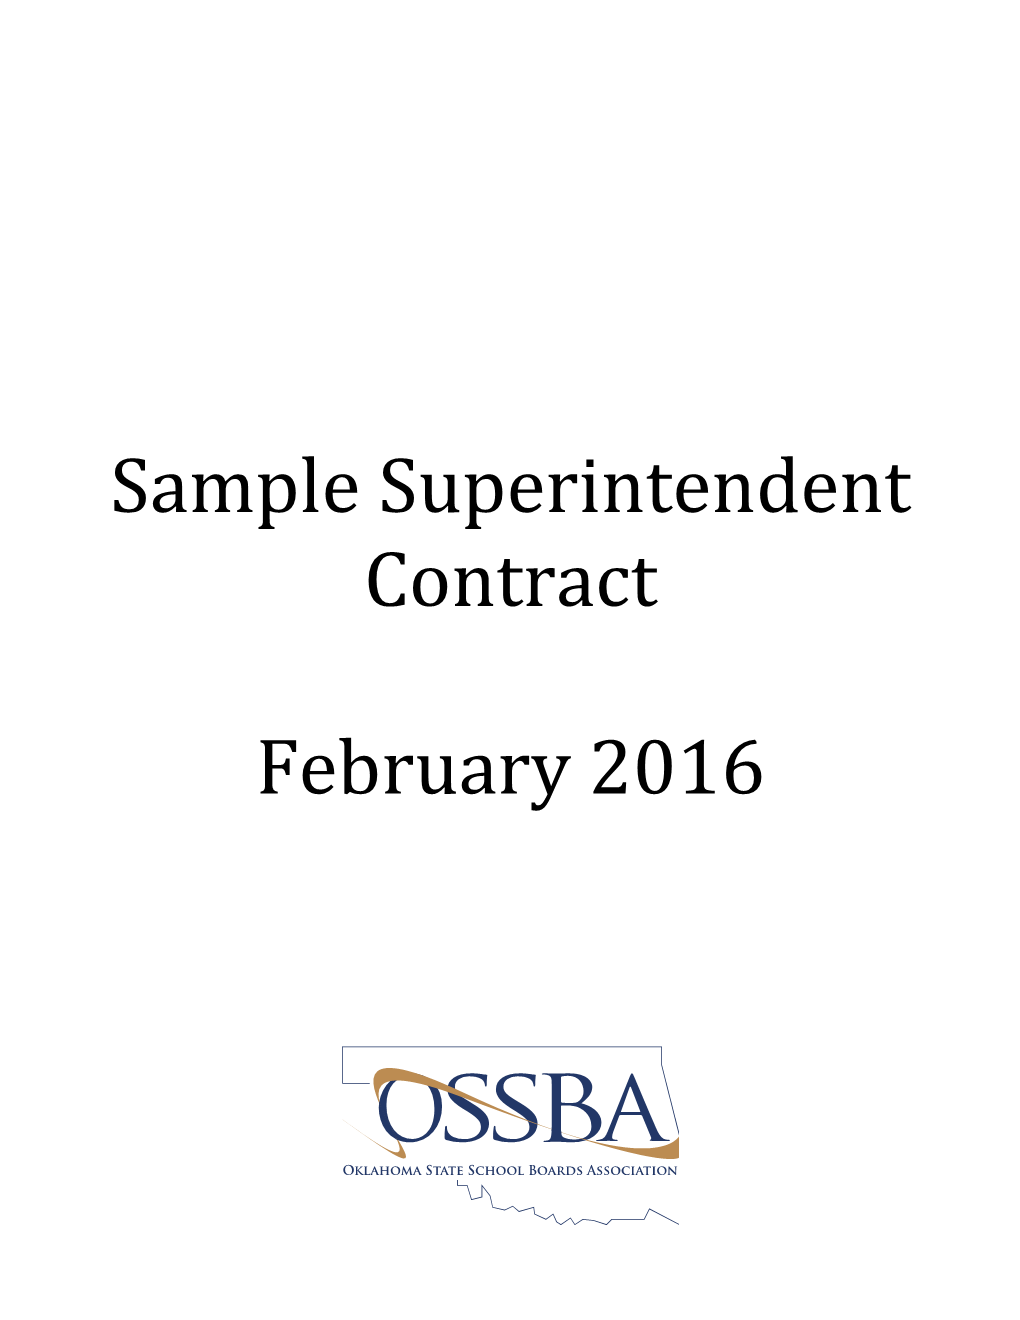 Sample Superintendent Contract